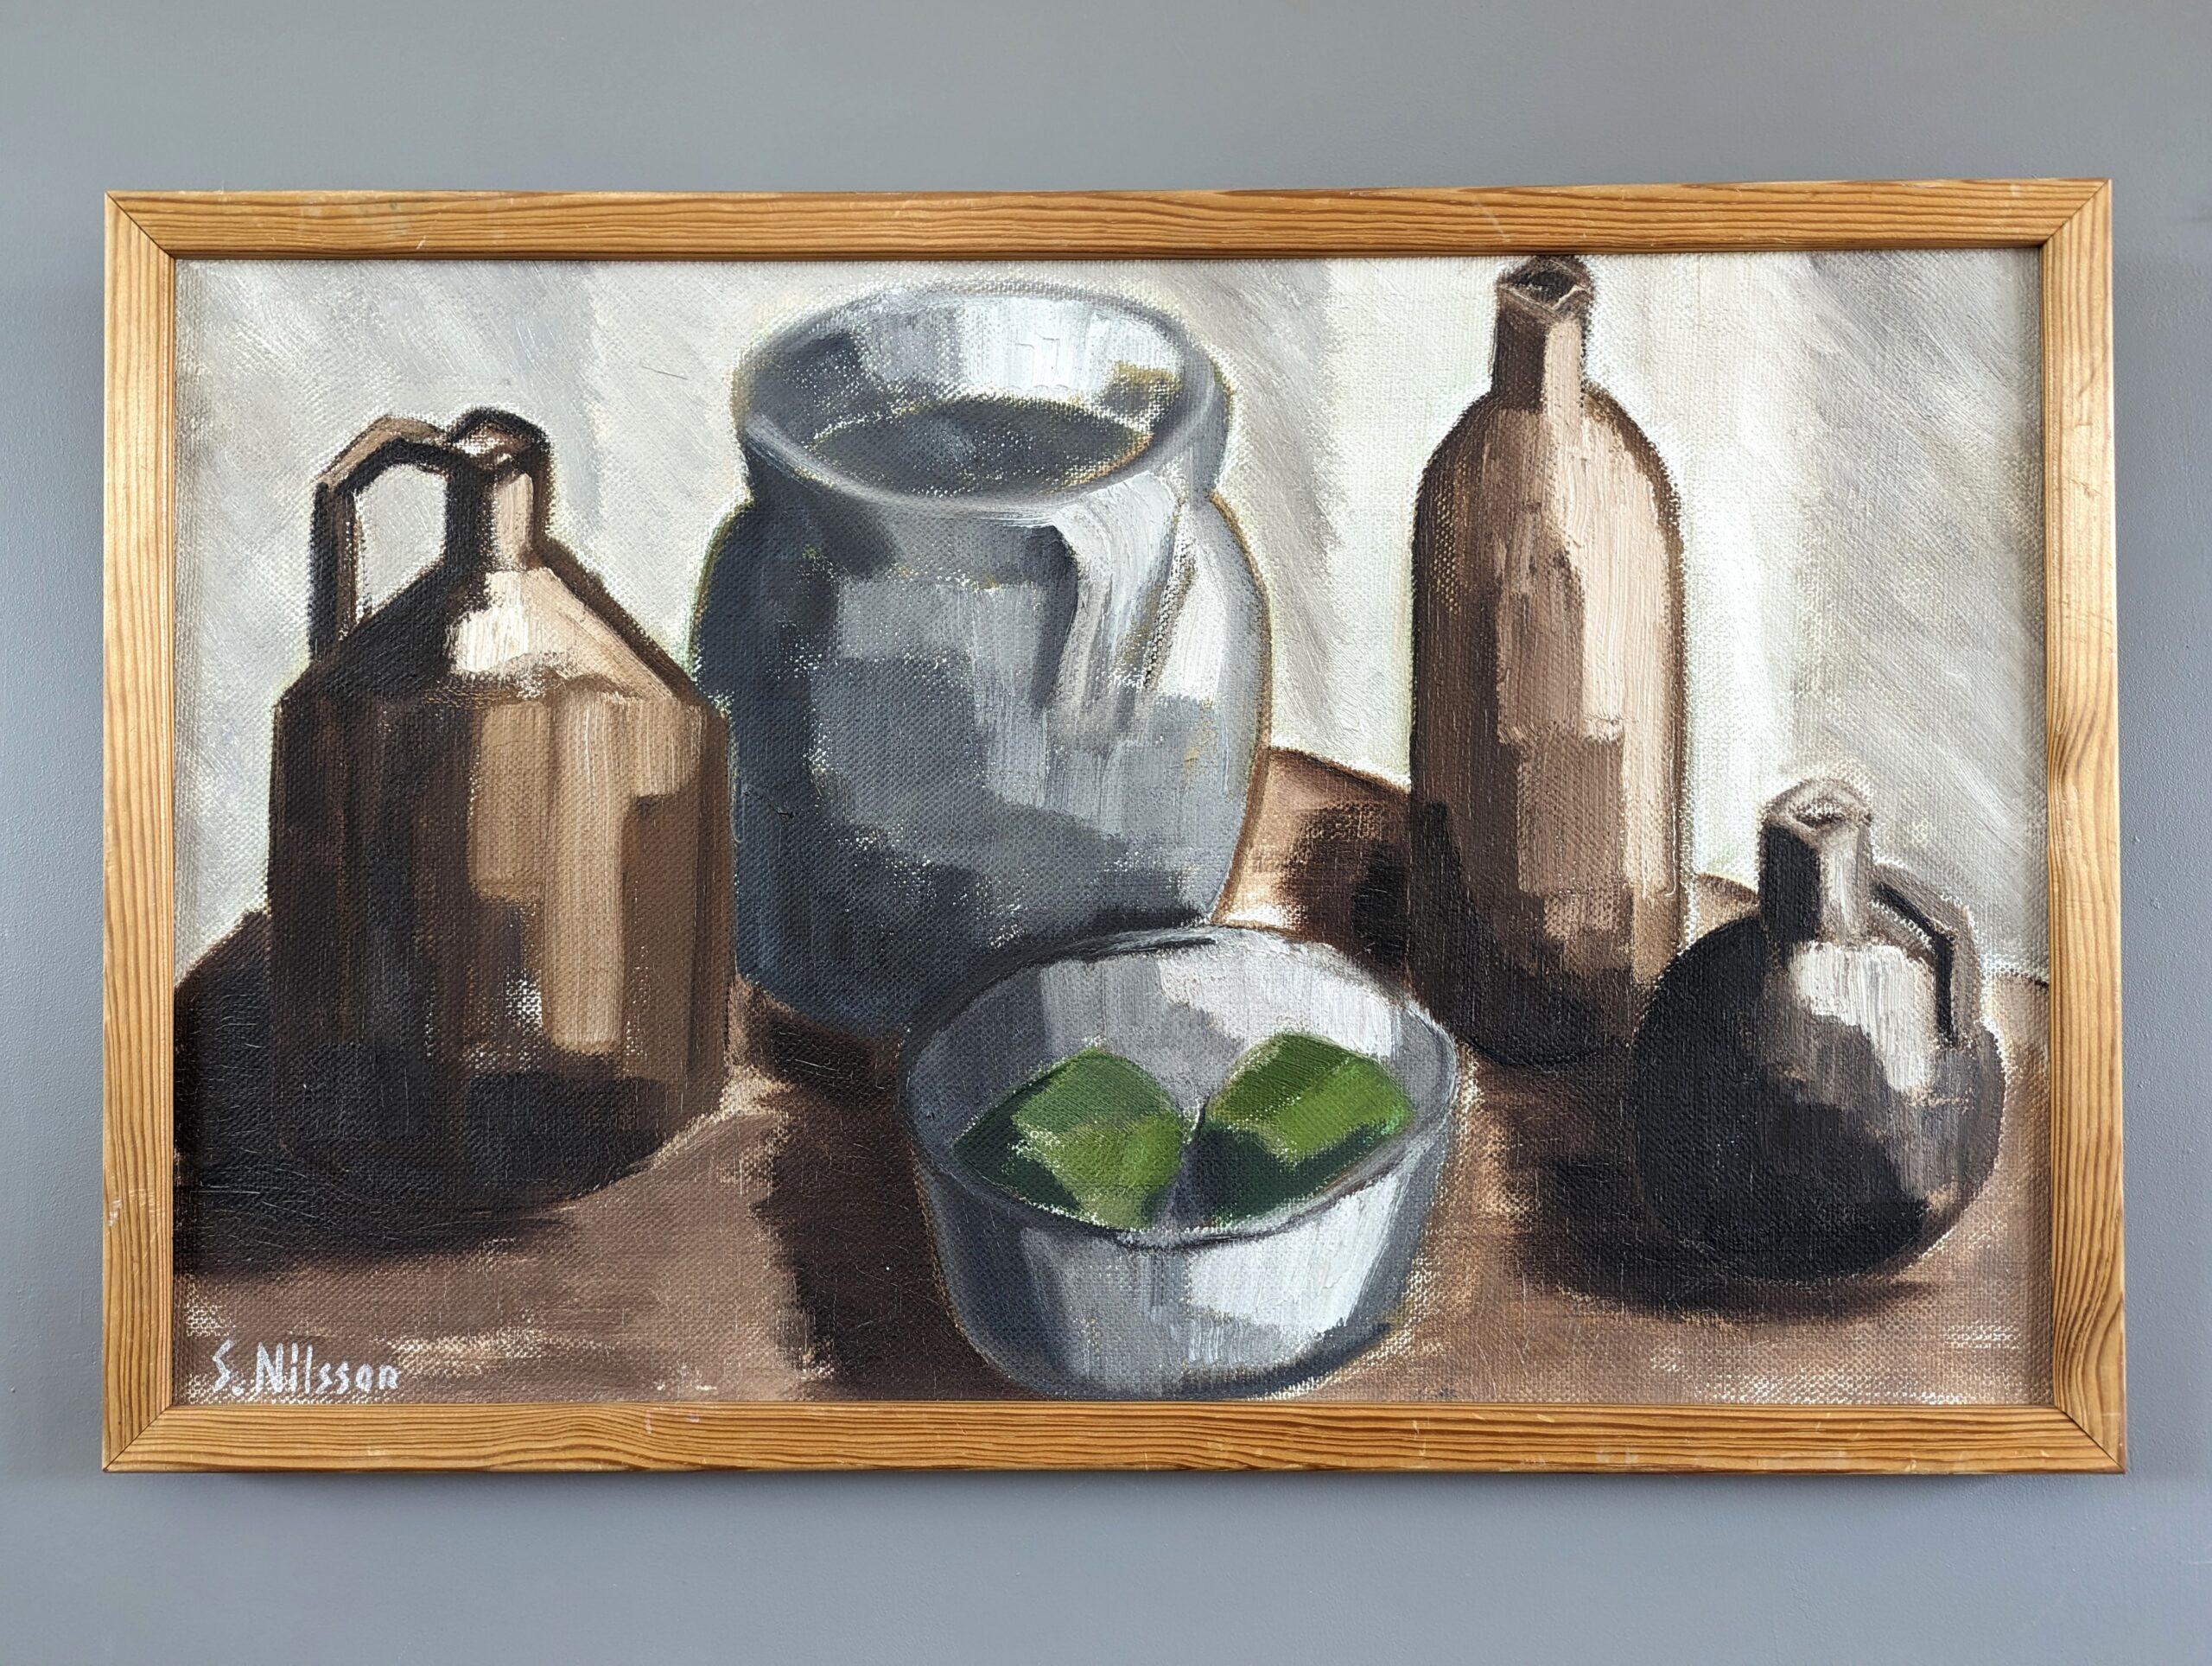 POTS & GREEN FRUIT
Size: 43 x 67 cm (including frame)
Oil on Canvas

An expressive mid-century still life oil composition, that invites viewers to appreciate the beauty of simple, everyday objects.

Set against a beige backdrop rests an assortment